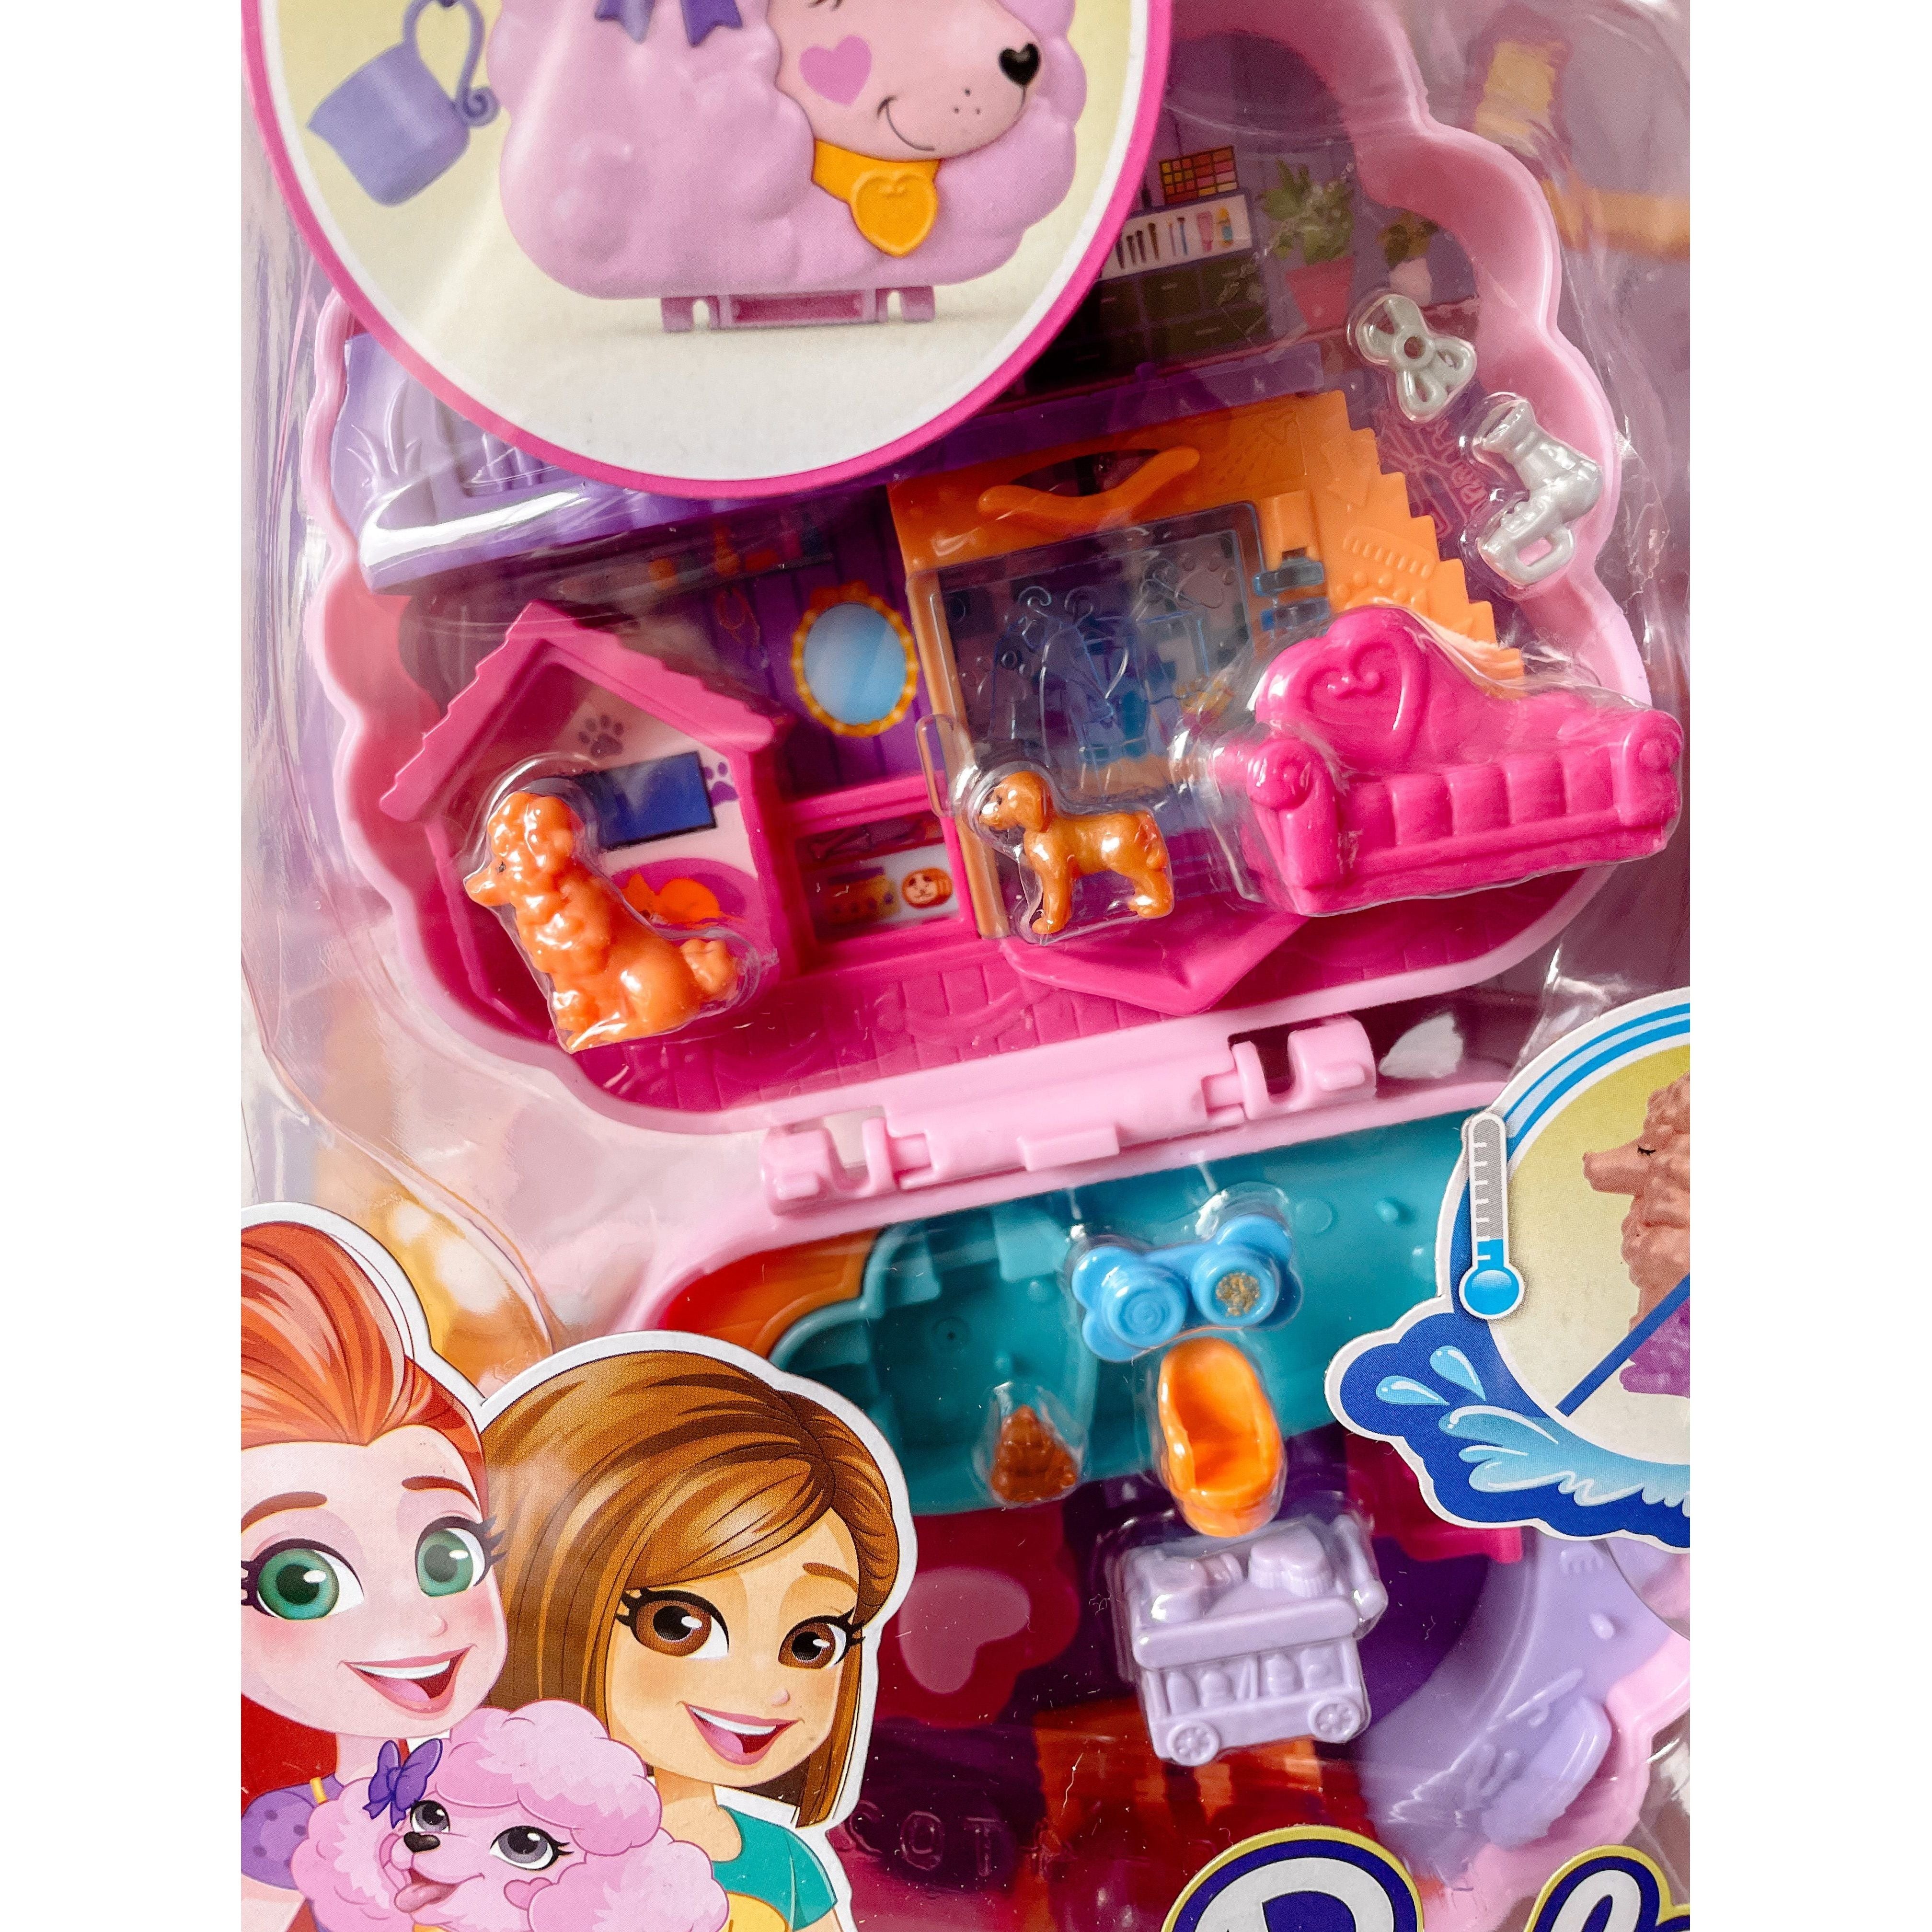 Polly Pocket Groom & Glam Poodle Compact Playset : Target